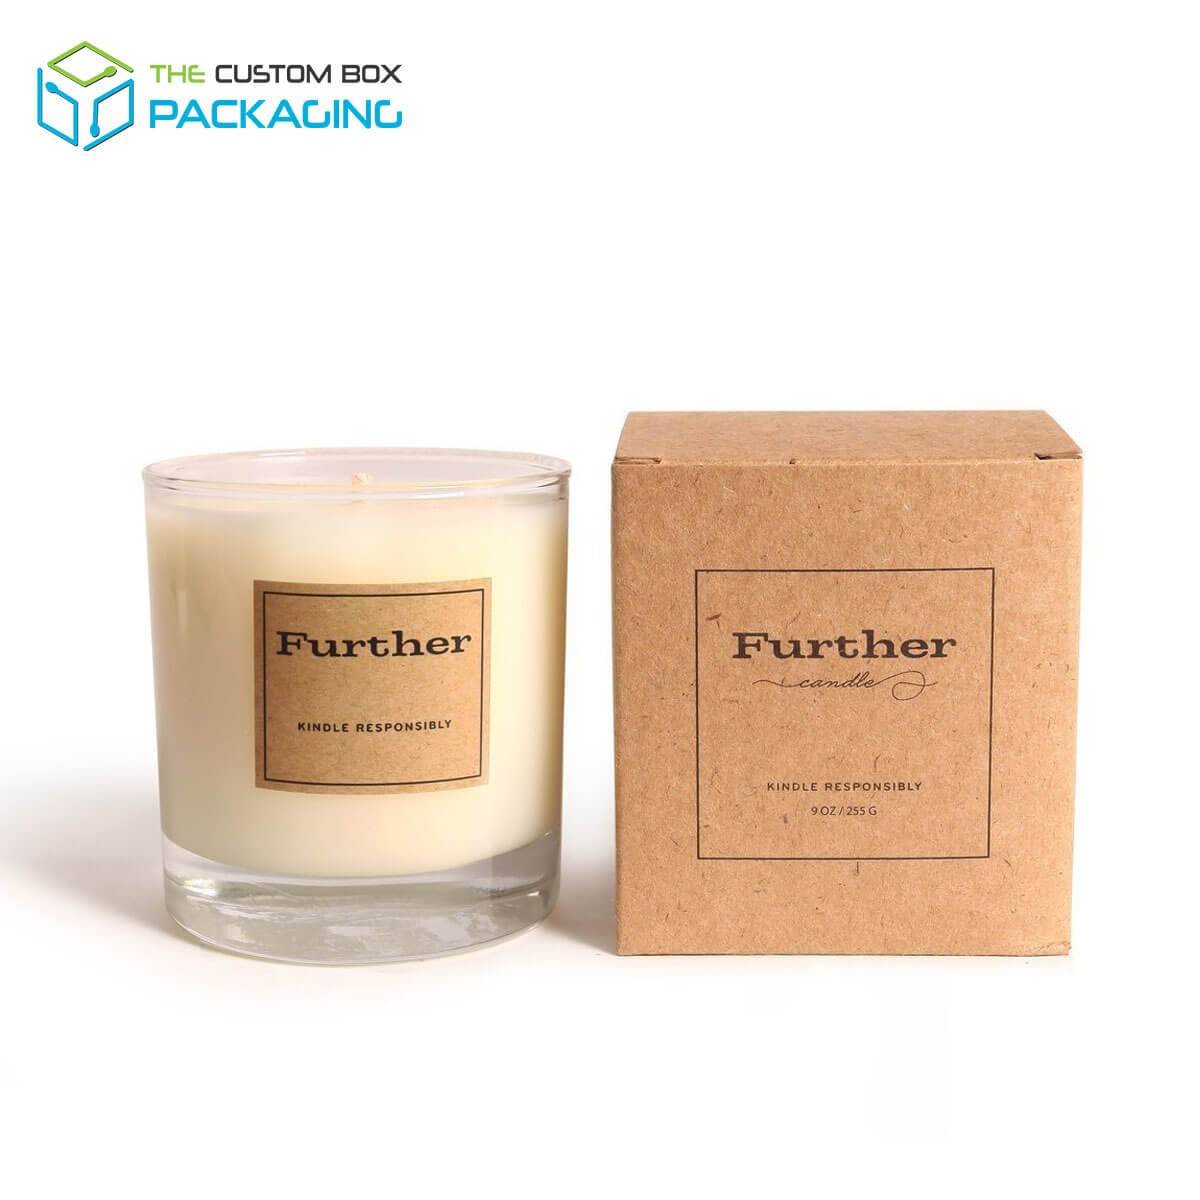 Custom Candle Boxes - Print Your Own Custom Product Packaging